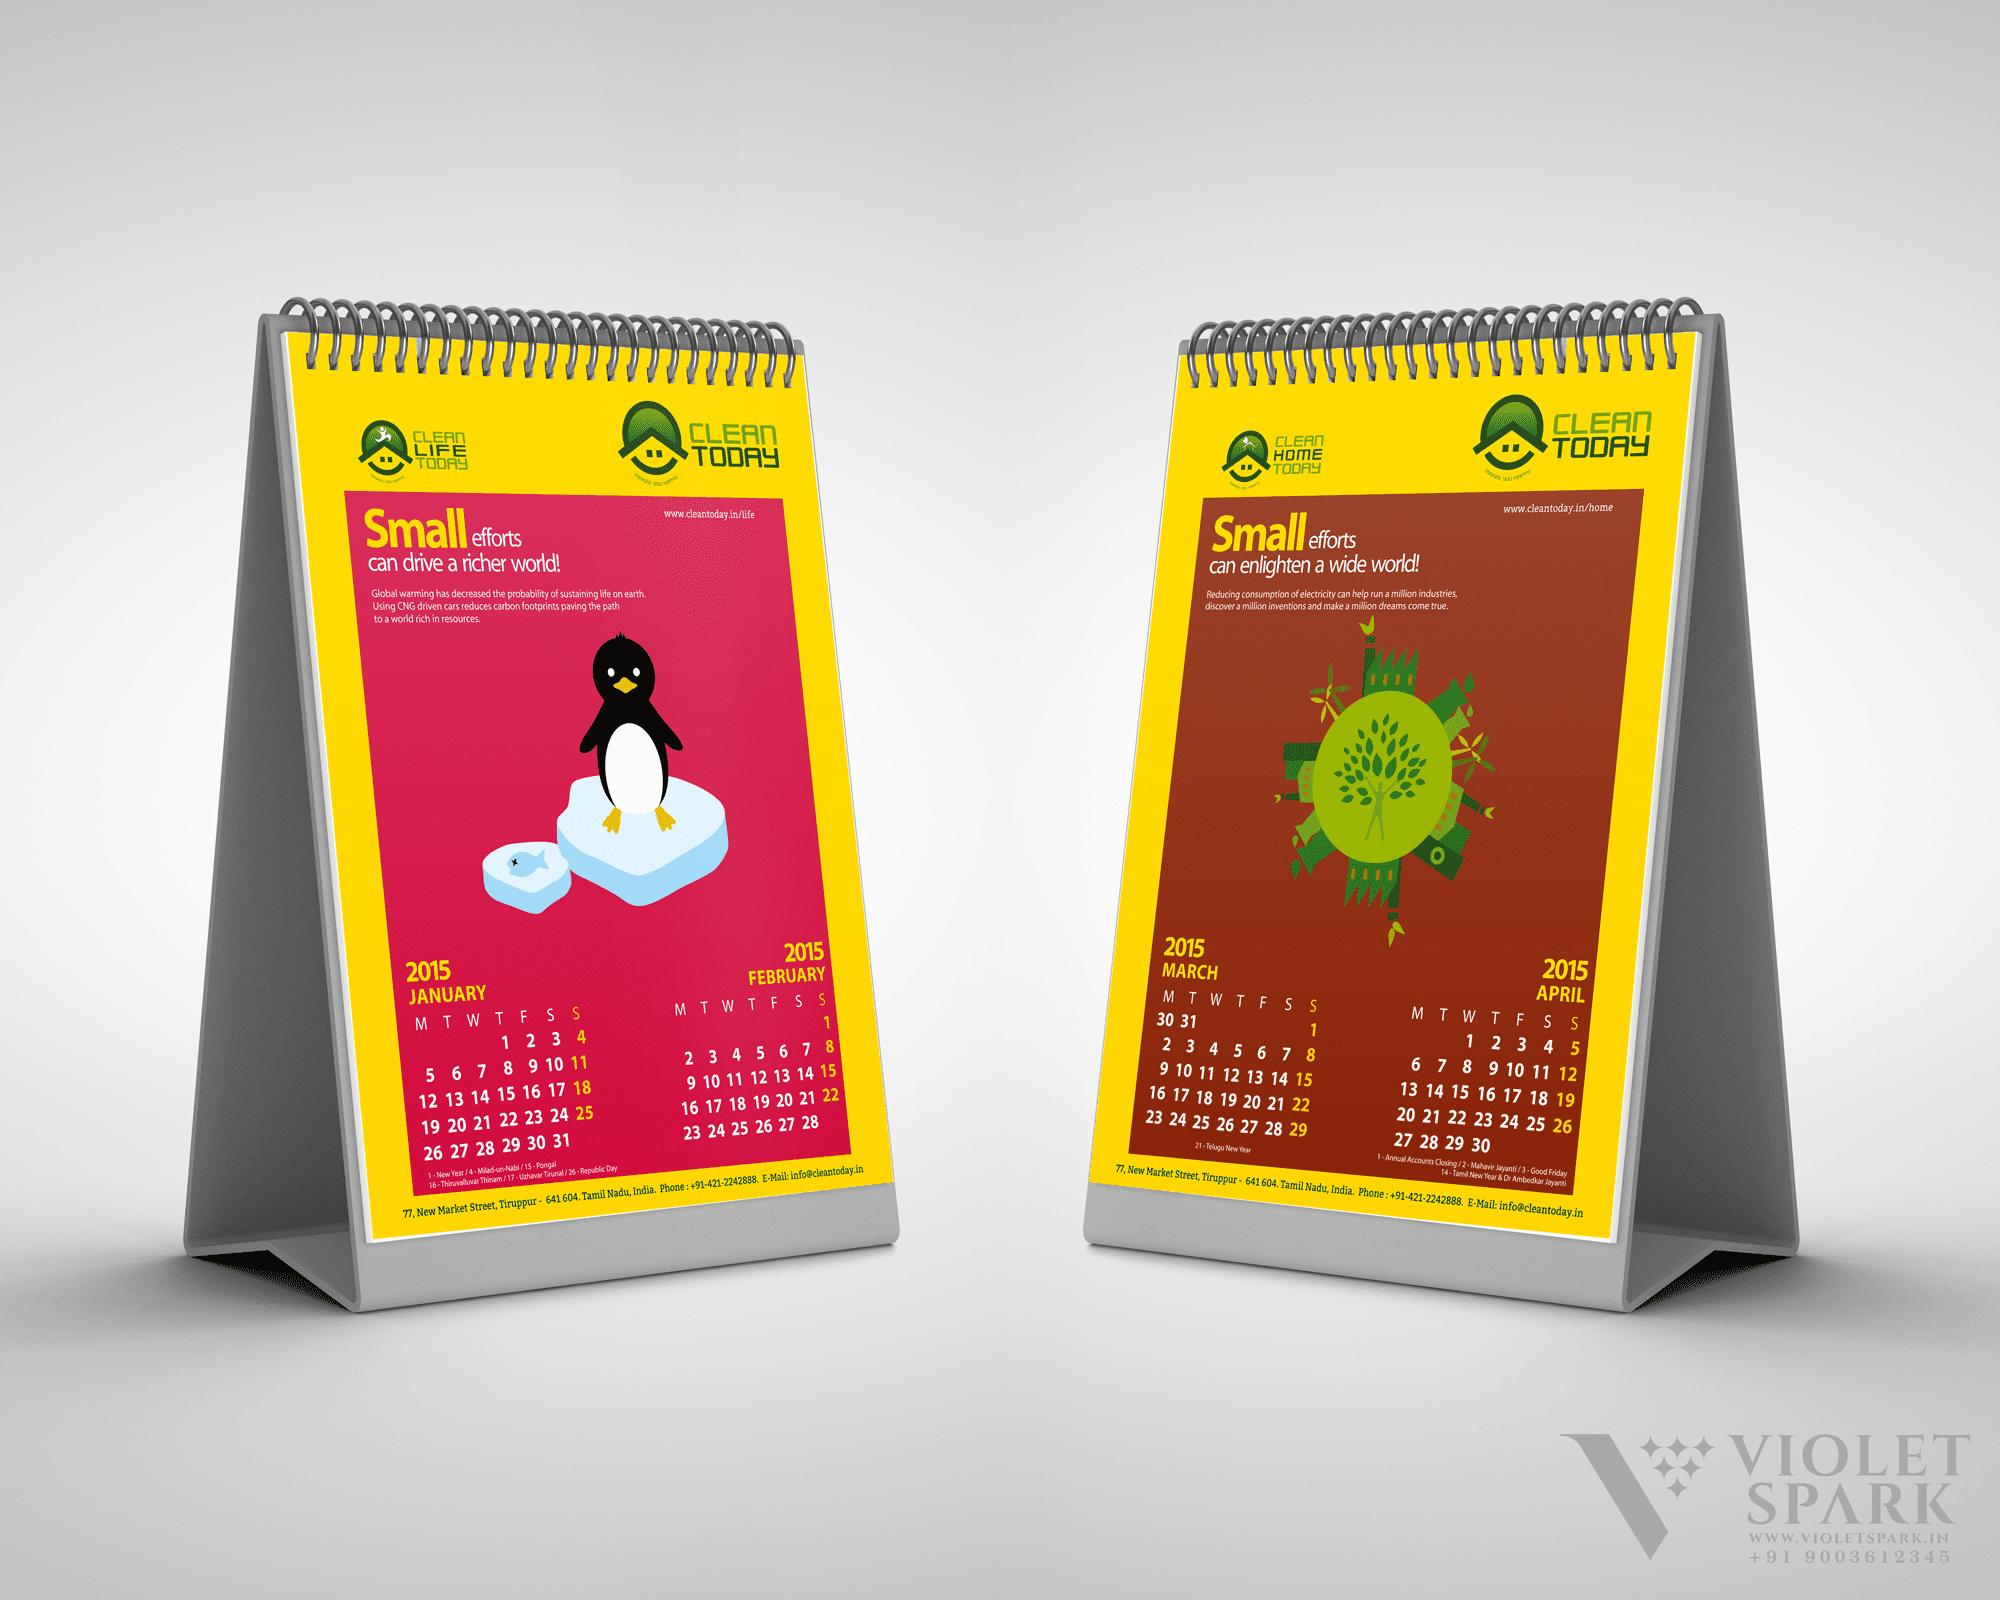 Clean Today by The Chennai Silk, Calendar Branding Packaging Design Digital Marketing in Singapore by Violet Spark